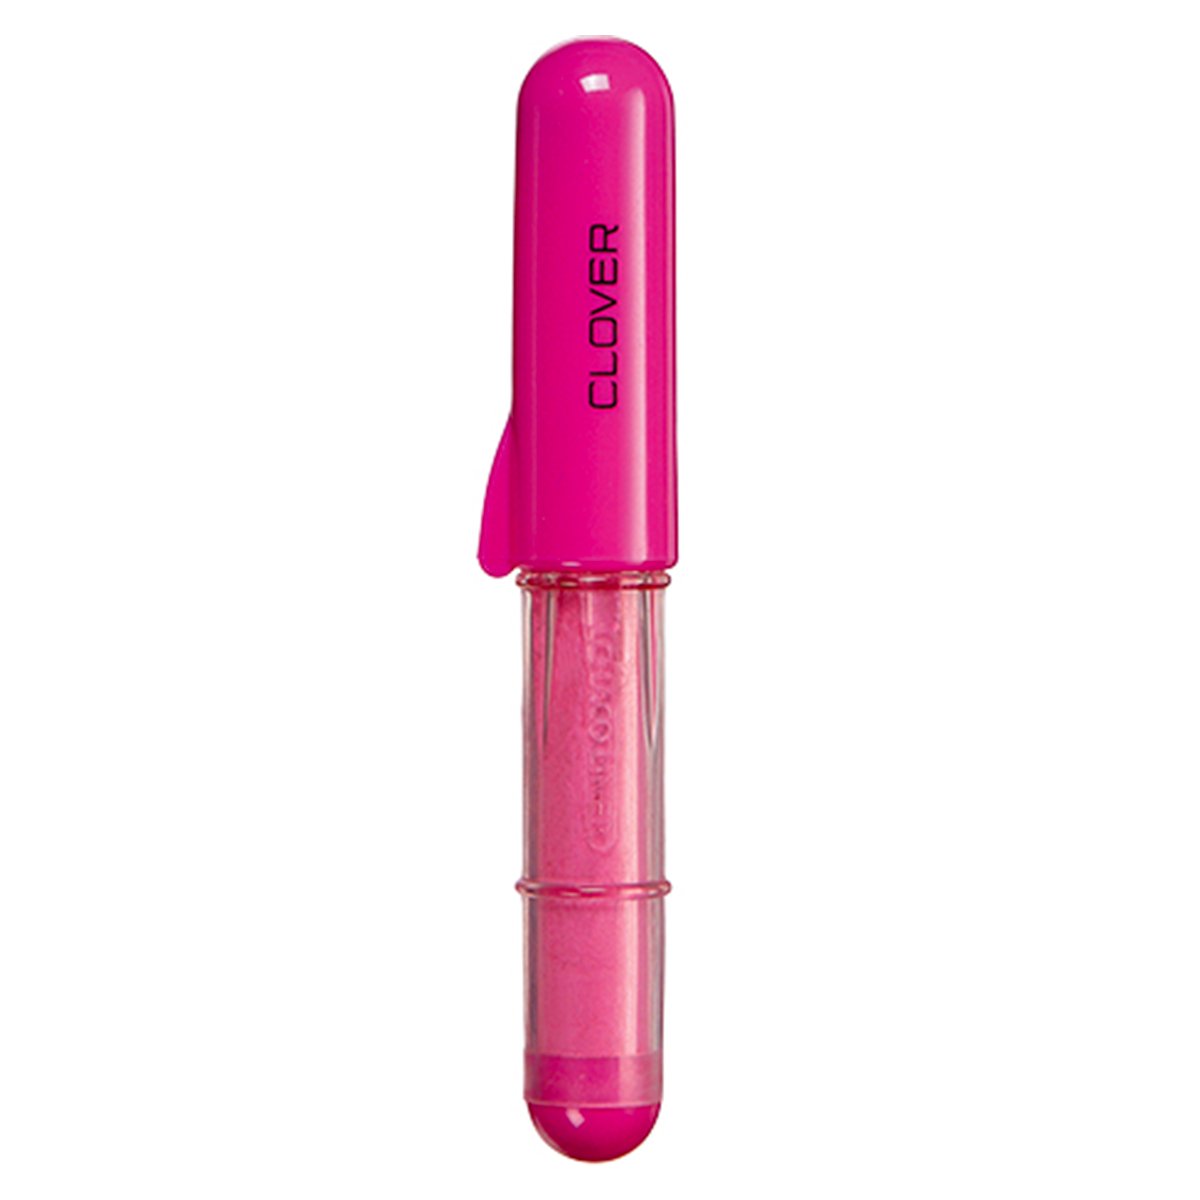 CLV - Chaco Liner Pen Style (Pink) - 0